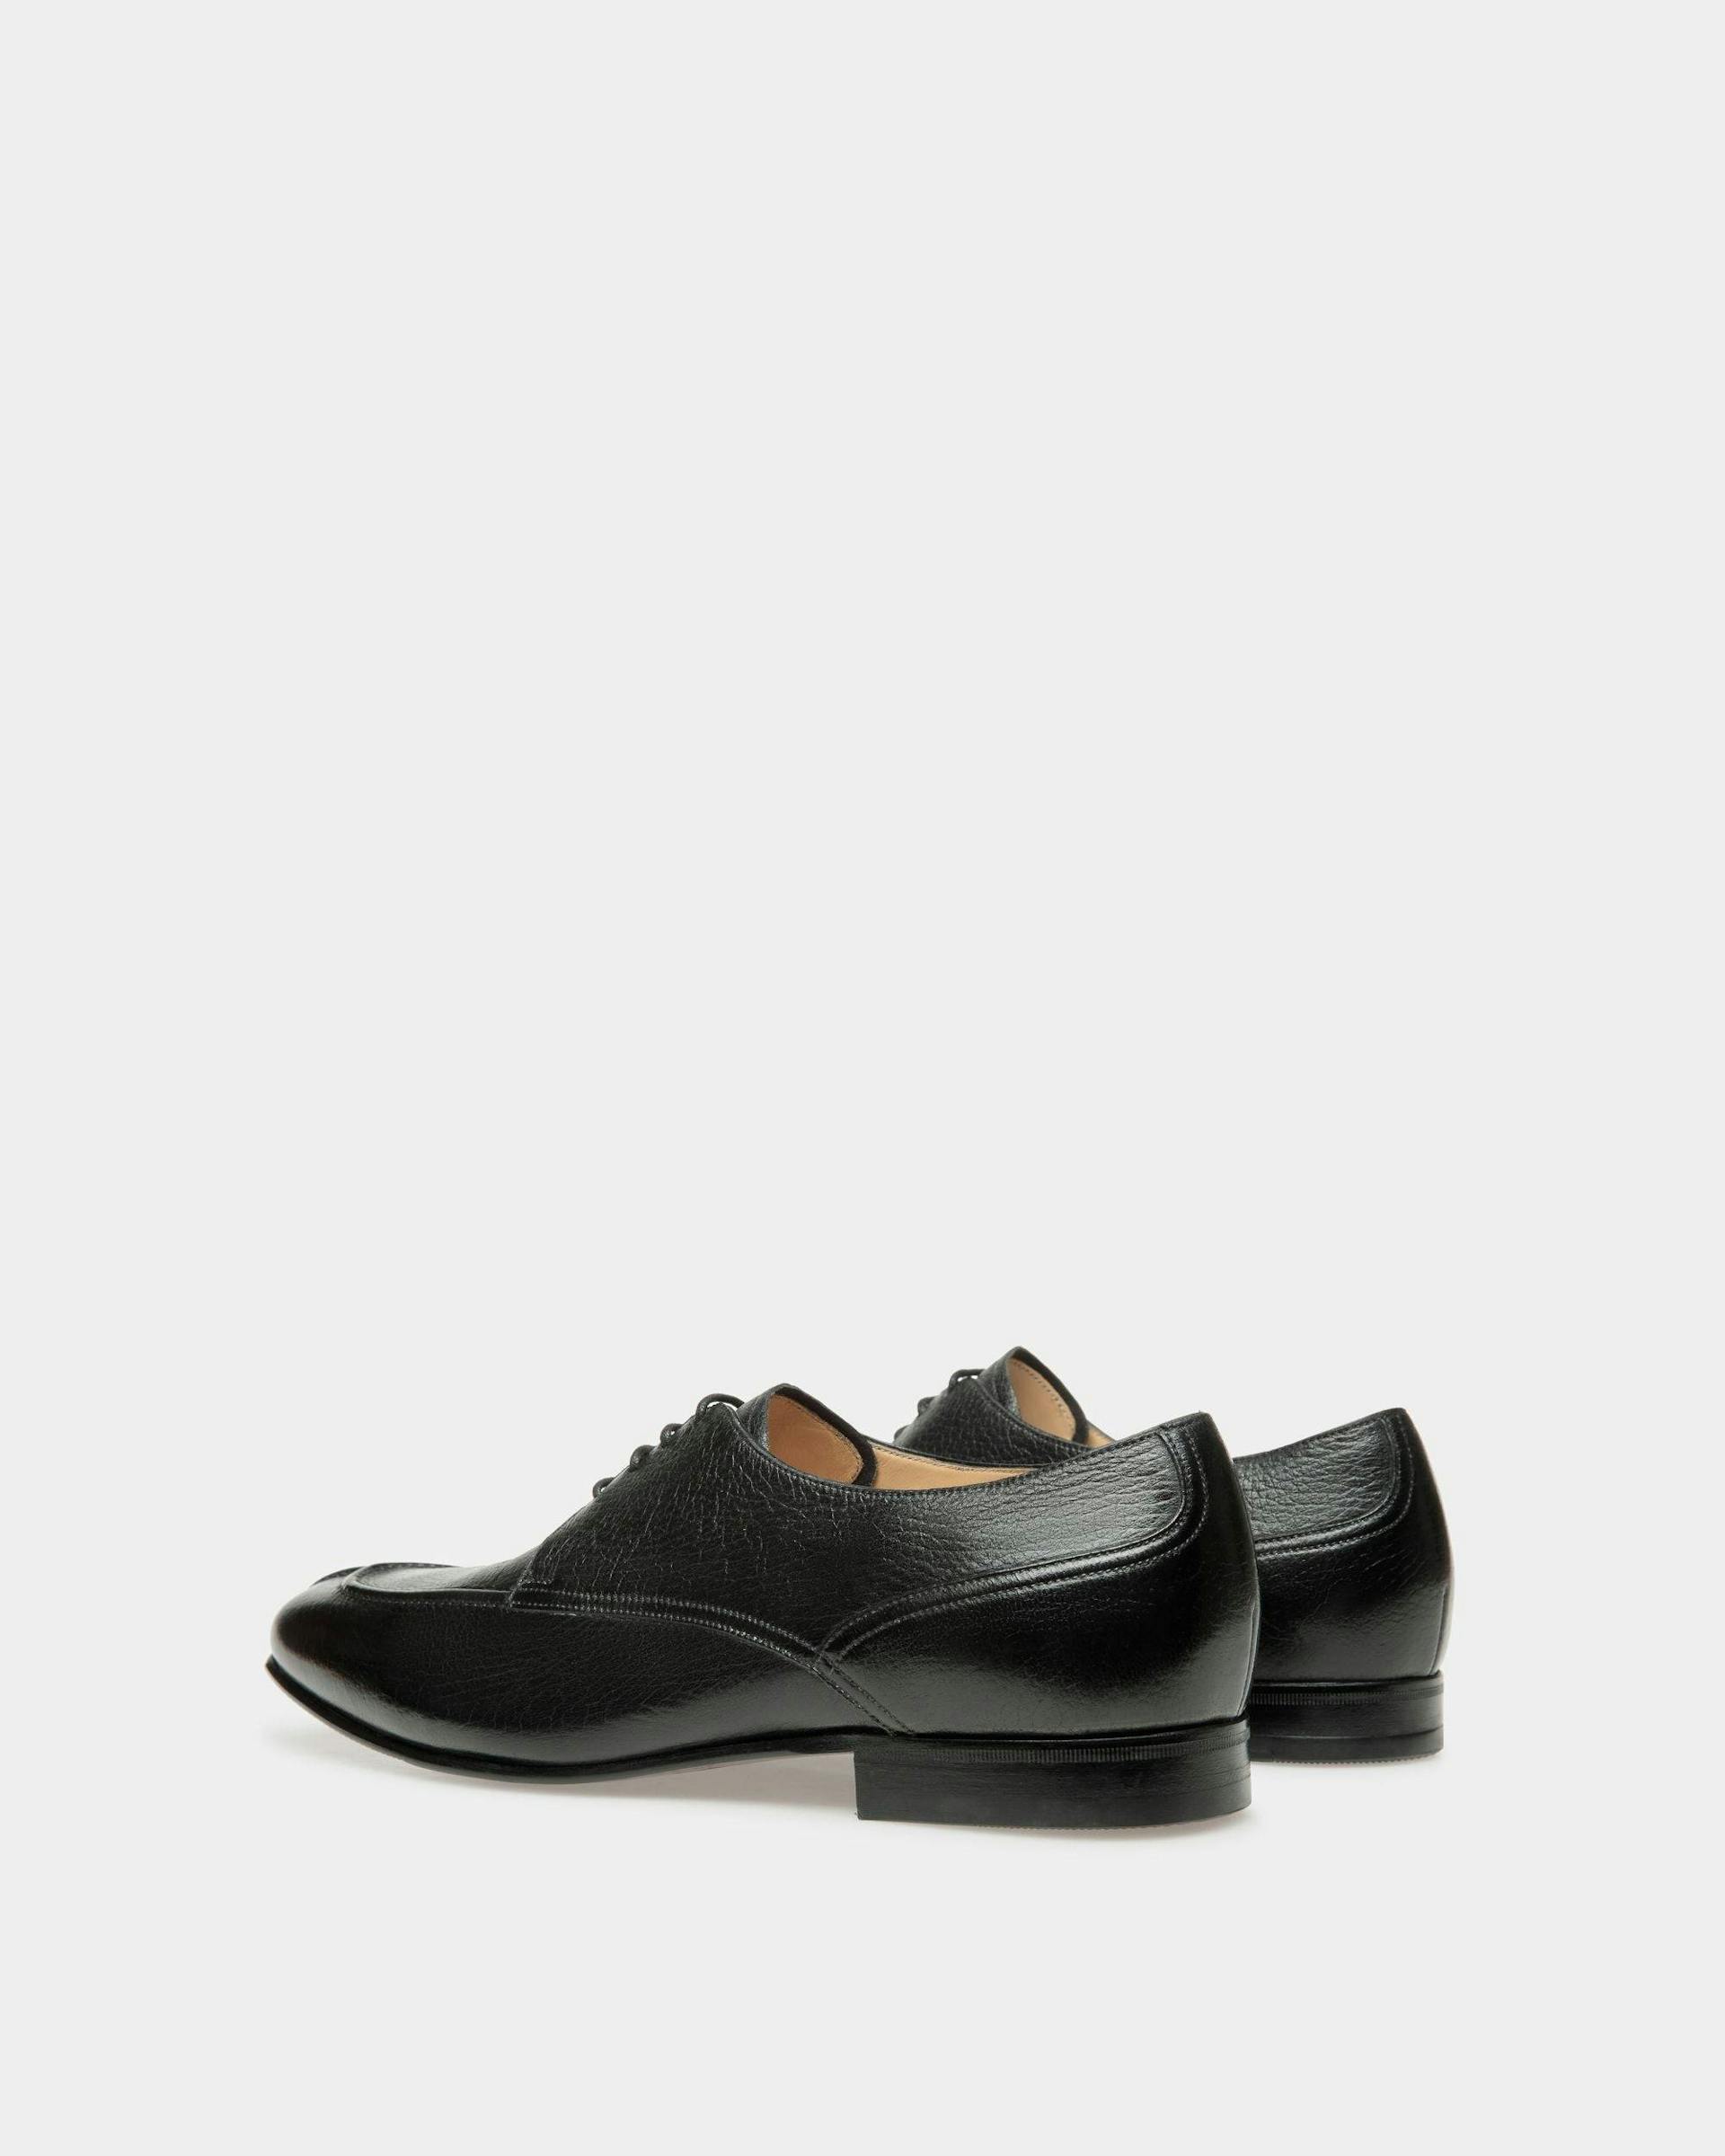 Men's Suisse Derby Shoes In Black Leather | Bally | Still Life 3/4 Back